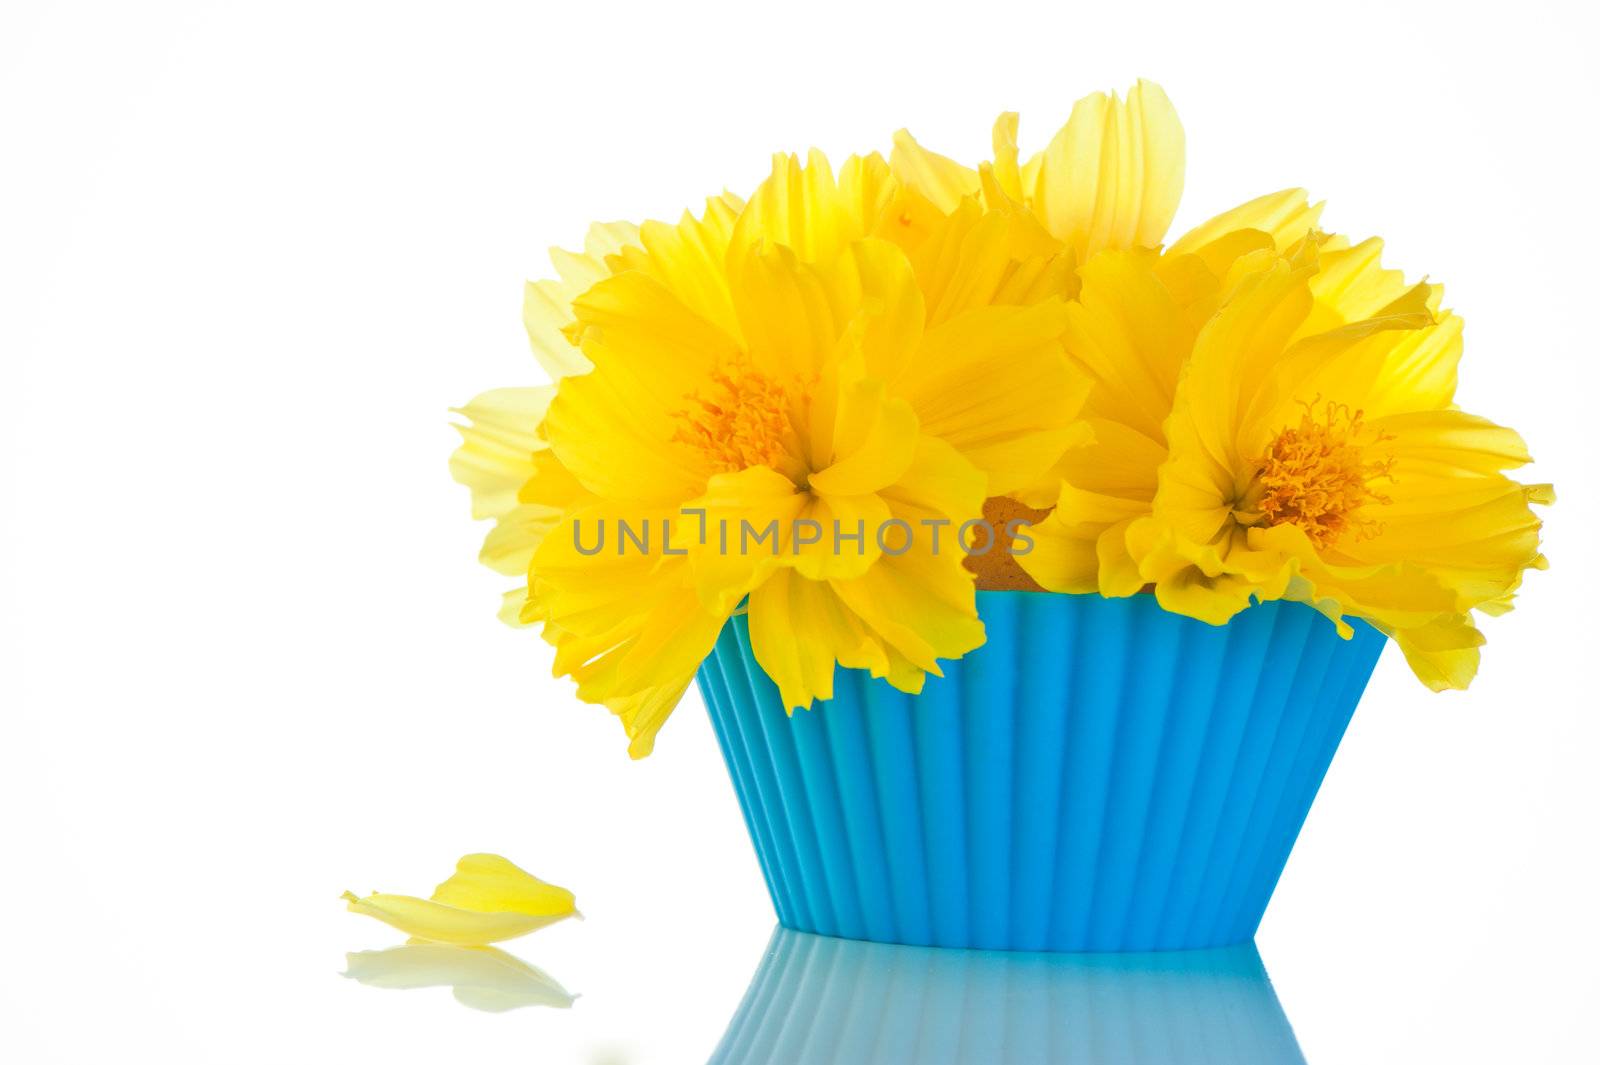 Small bouquet of flowers on an edible content